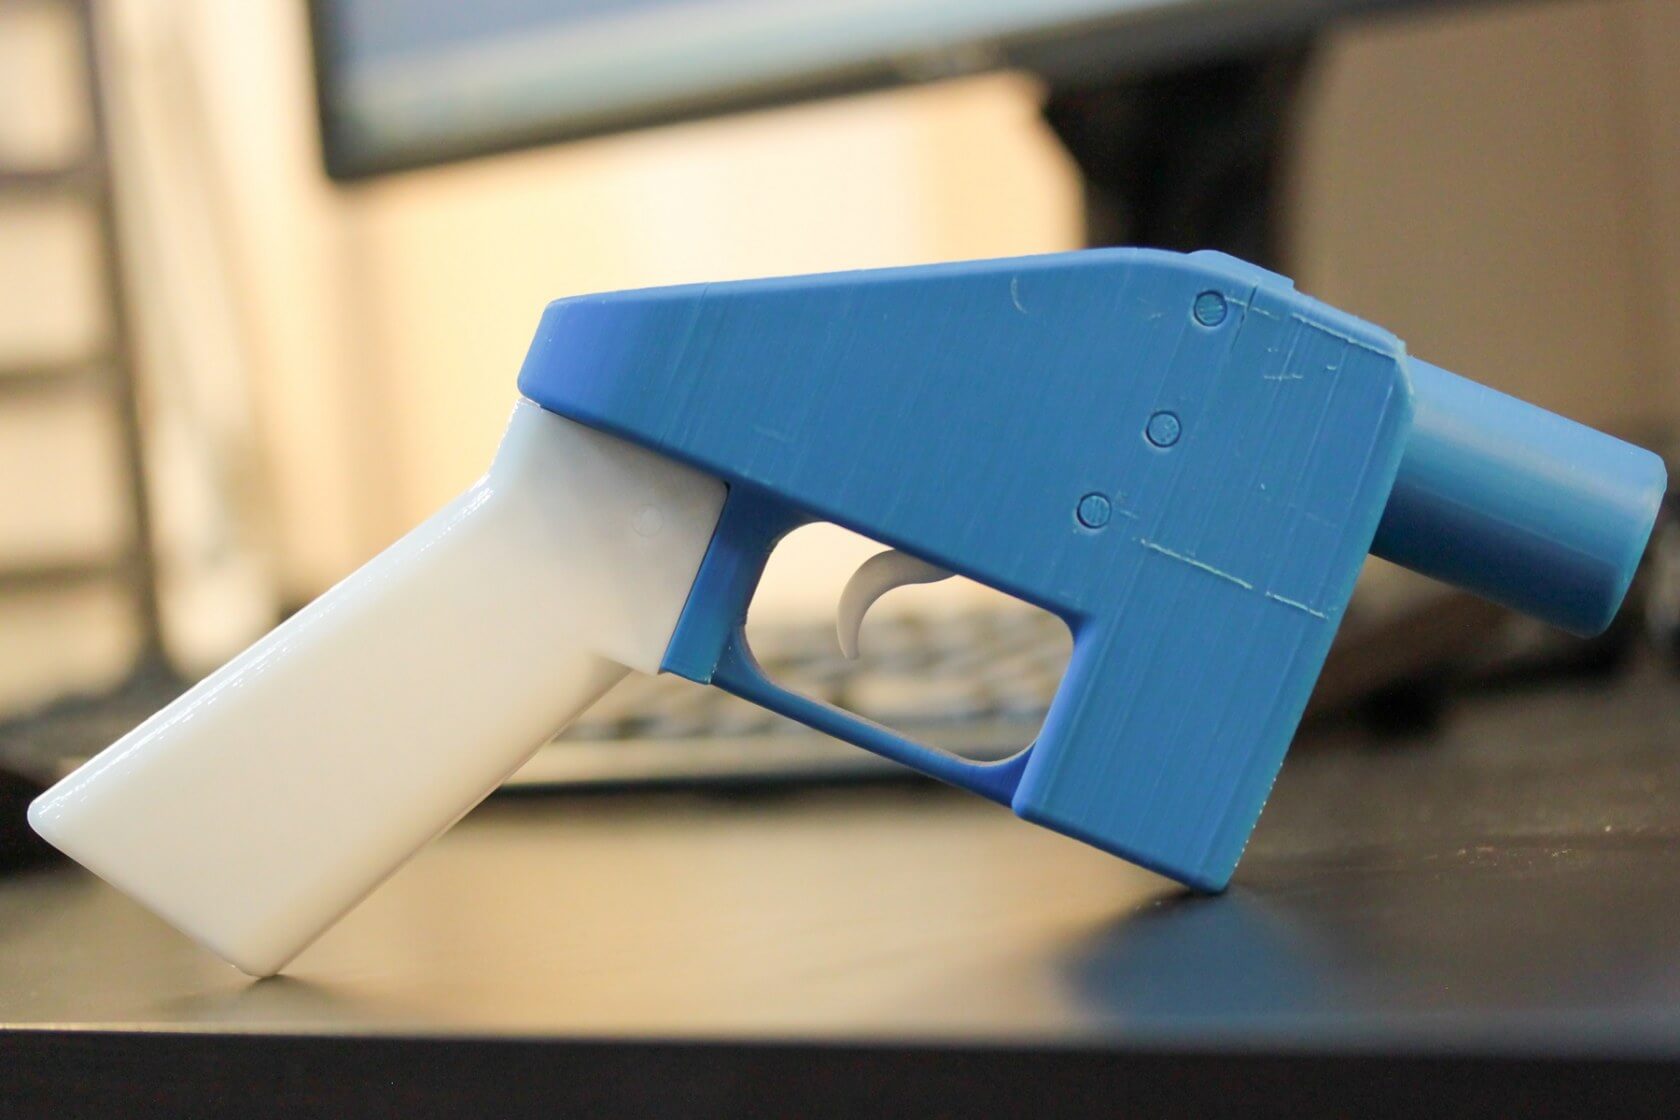 Nine states sue to prevent 3D-printed gun plans going online